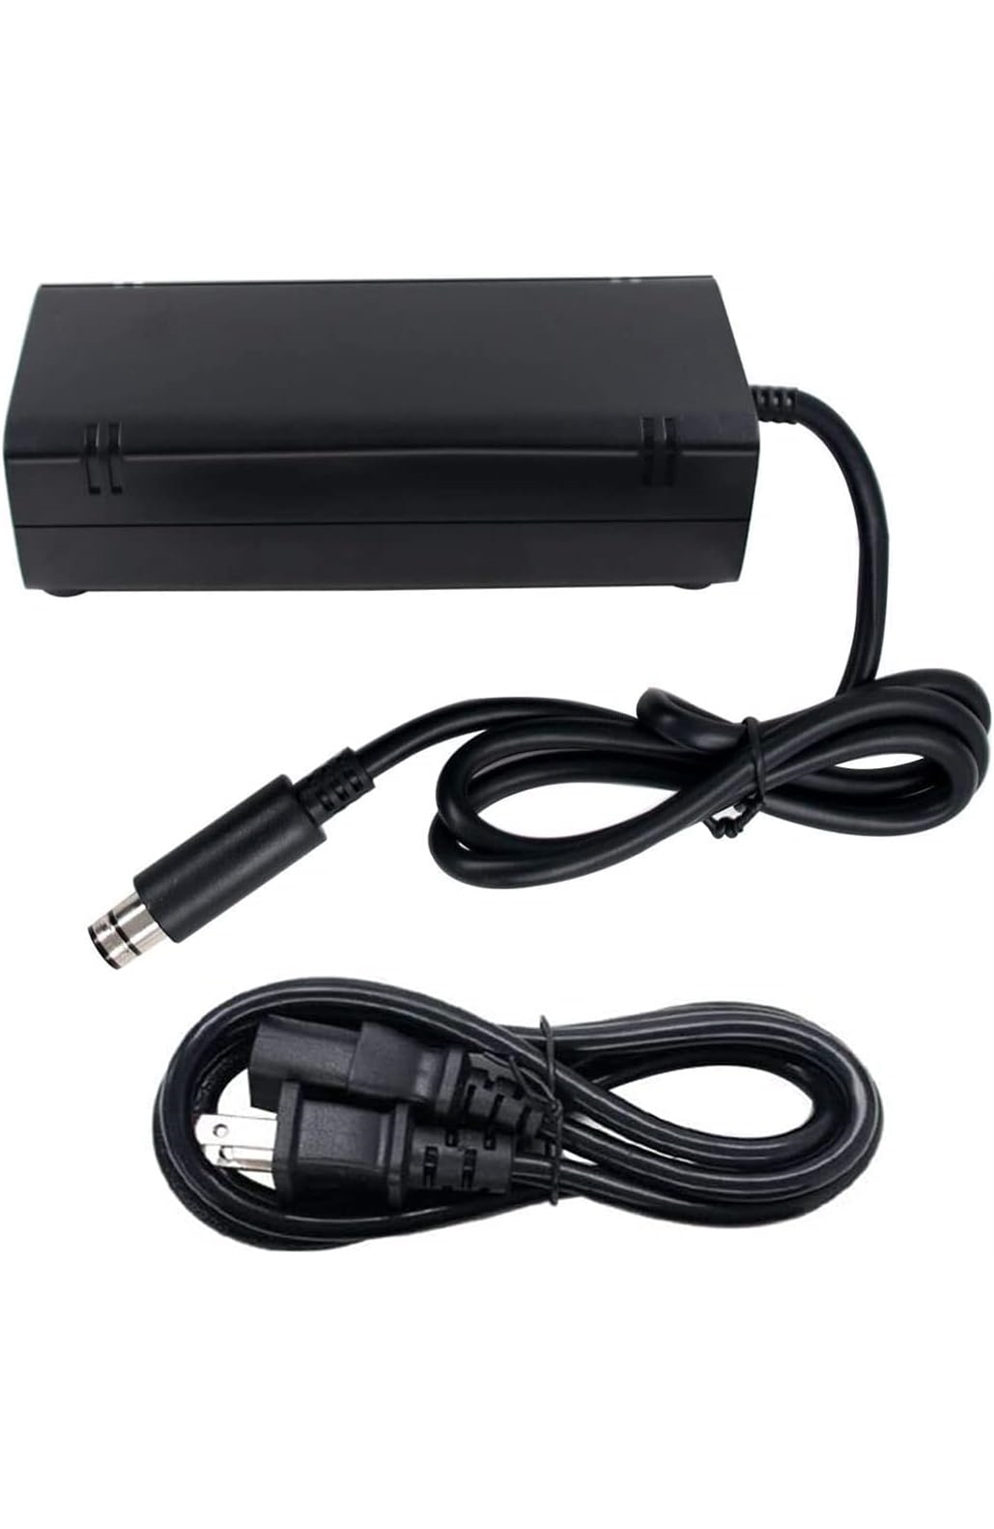 Official Ac Adapter For Xb360 (175W) 2 Prong with Cable